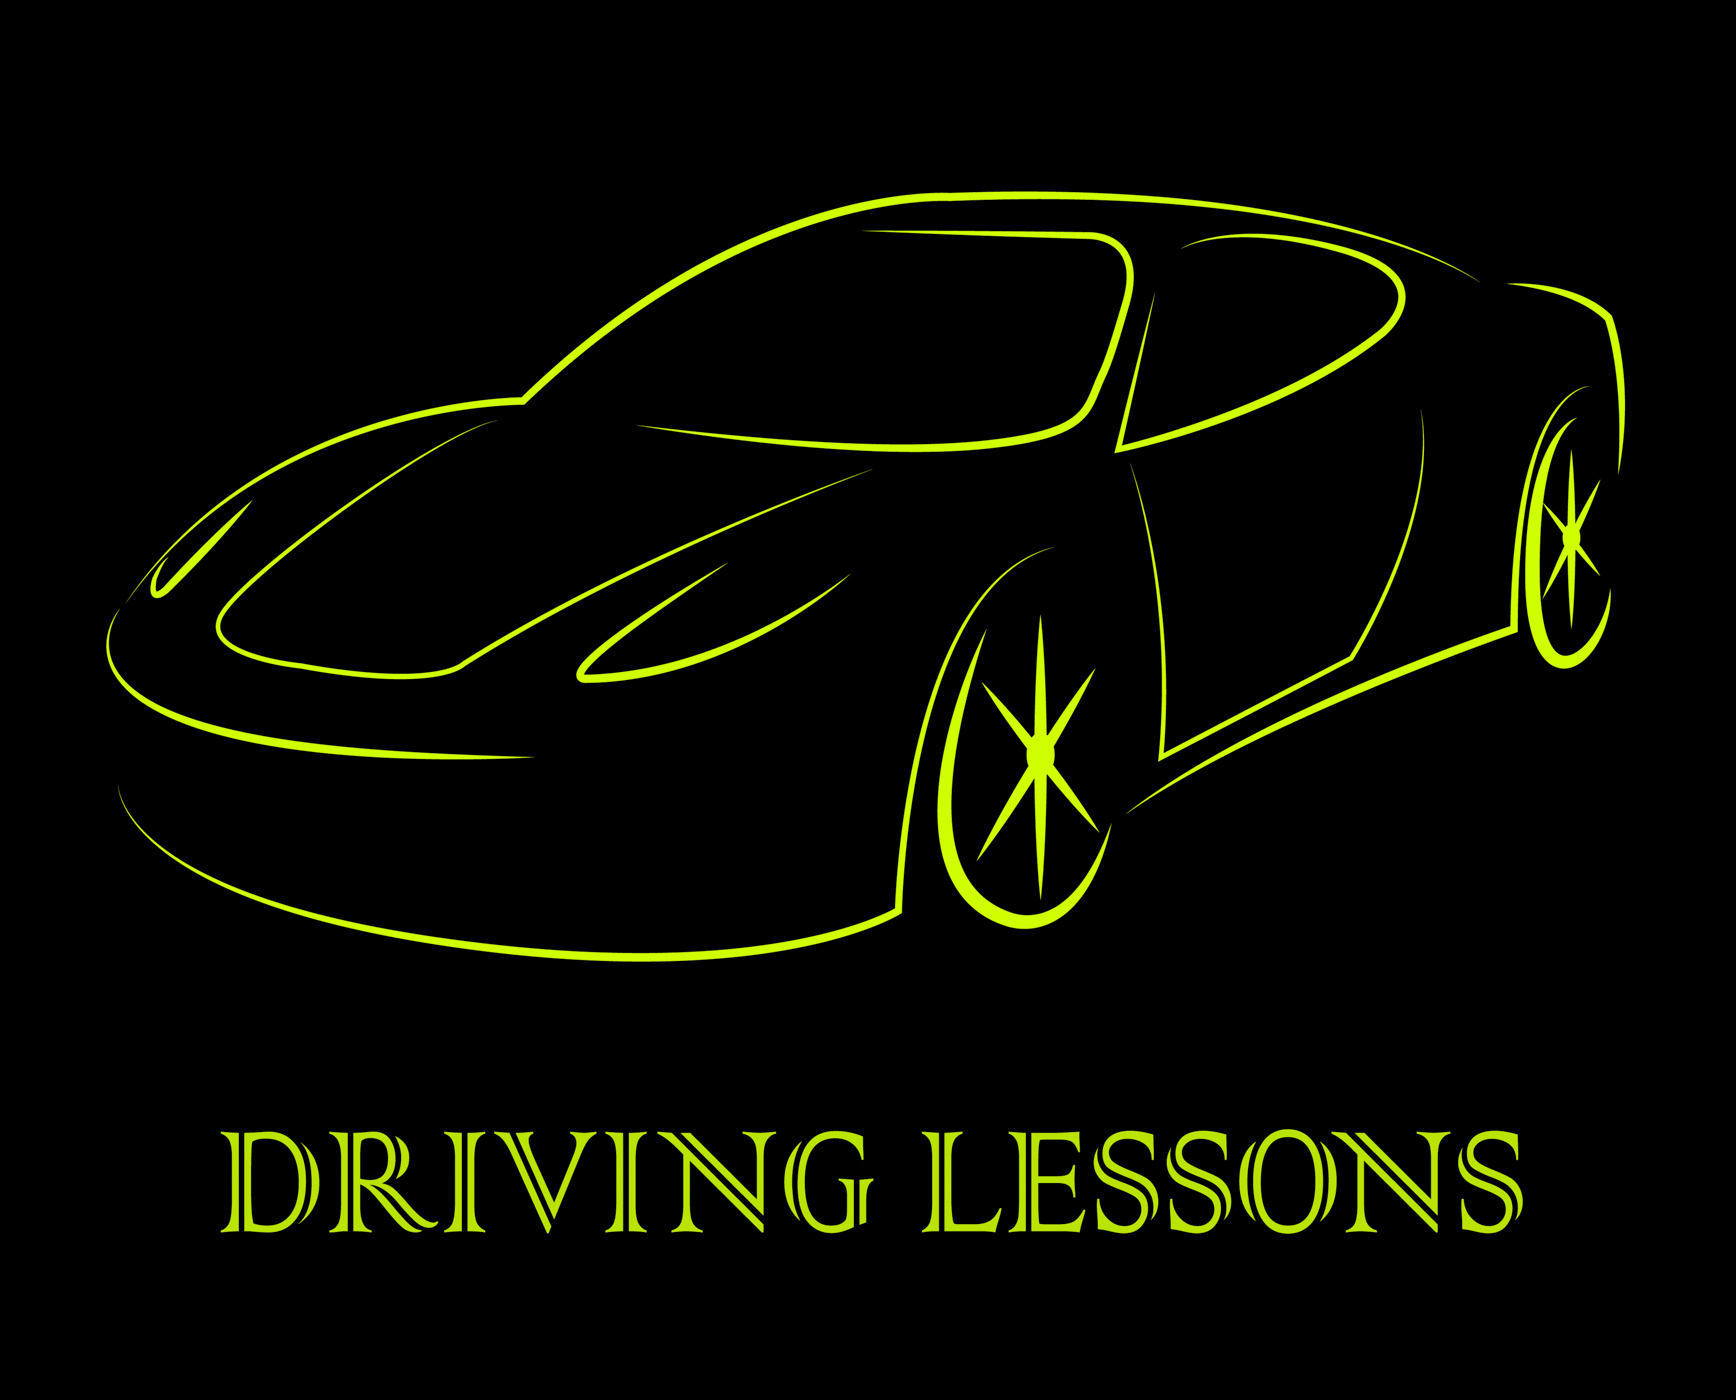 Driving lessons means passenger car and automobile photo